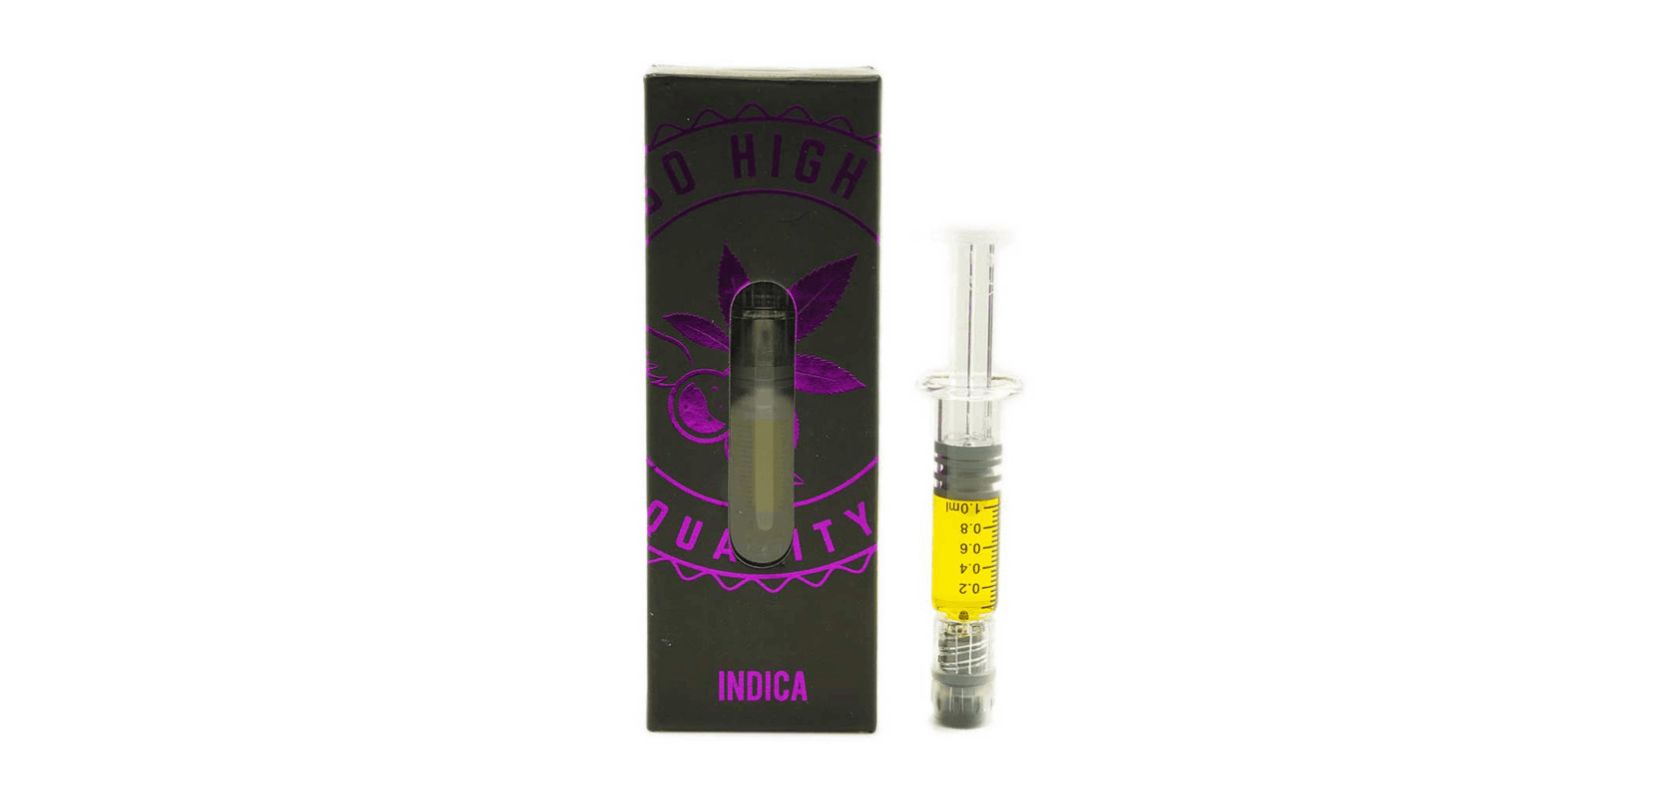 Looking for a potent pure THC oil syringe that provides an authentic cannabis experience? This distillate syringe from So High Premium Extracts might be just what you need. 